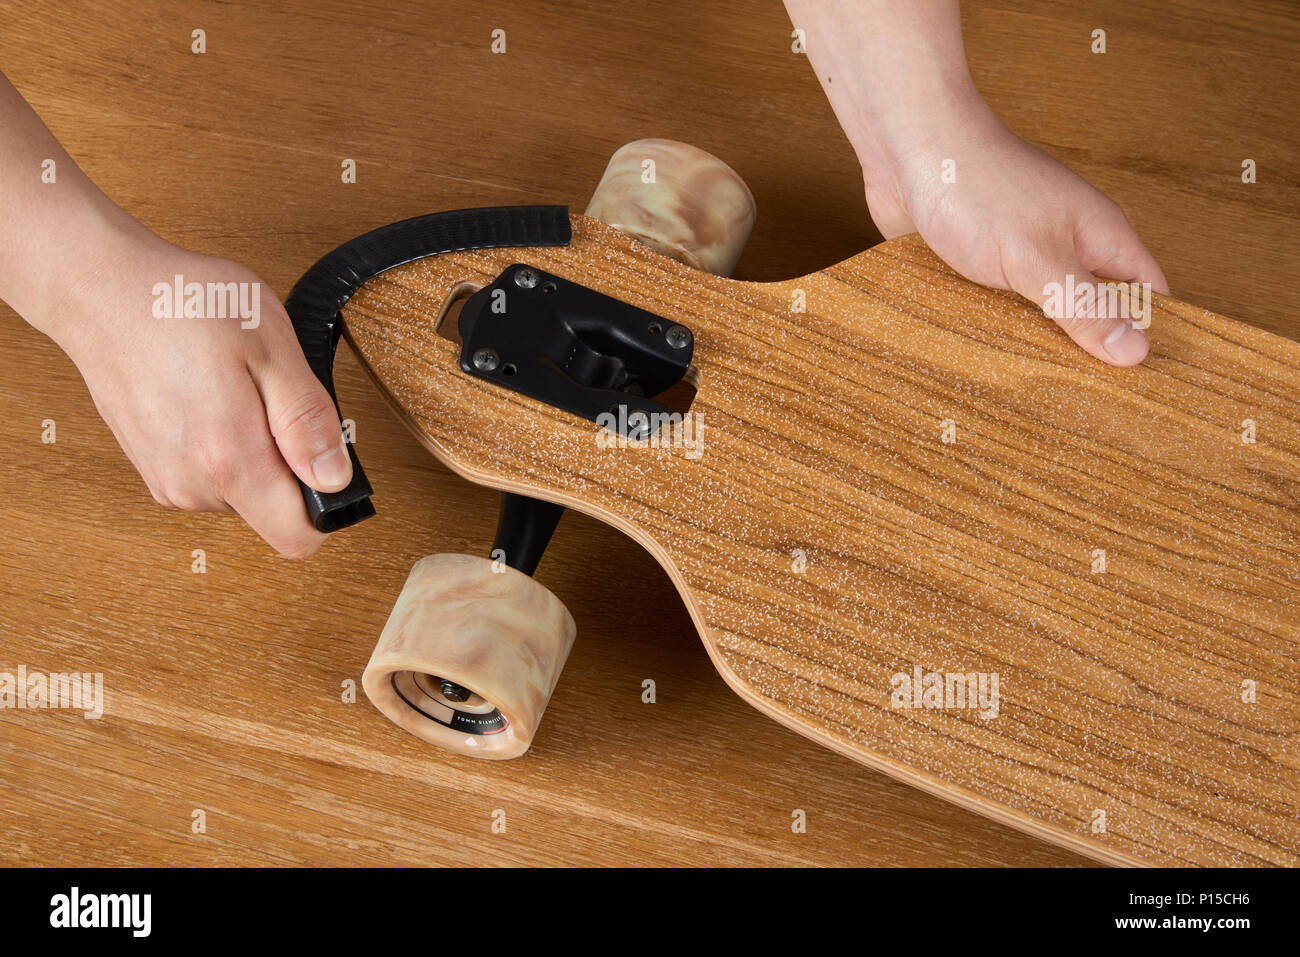 Installing a guard for longboard nose protection Stock Photo - Alamy